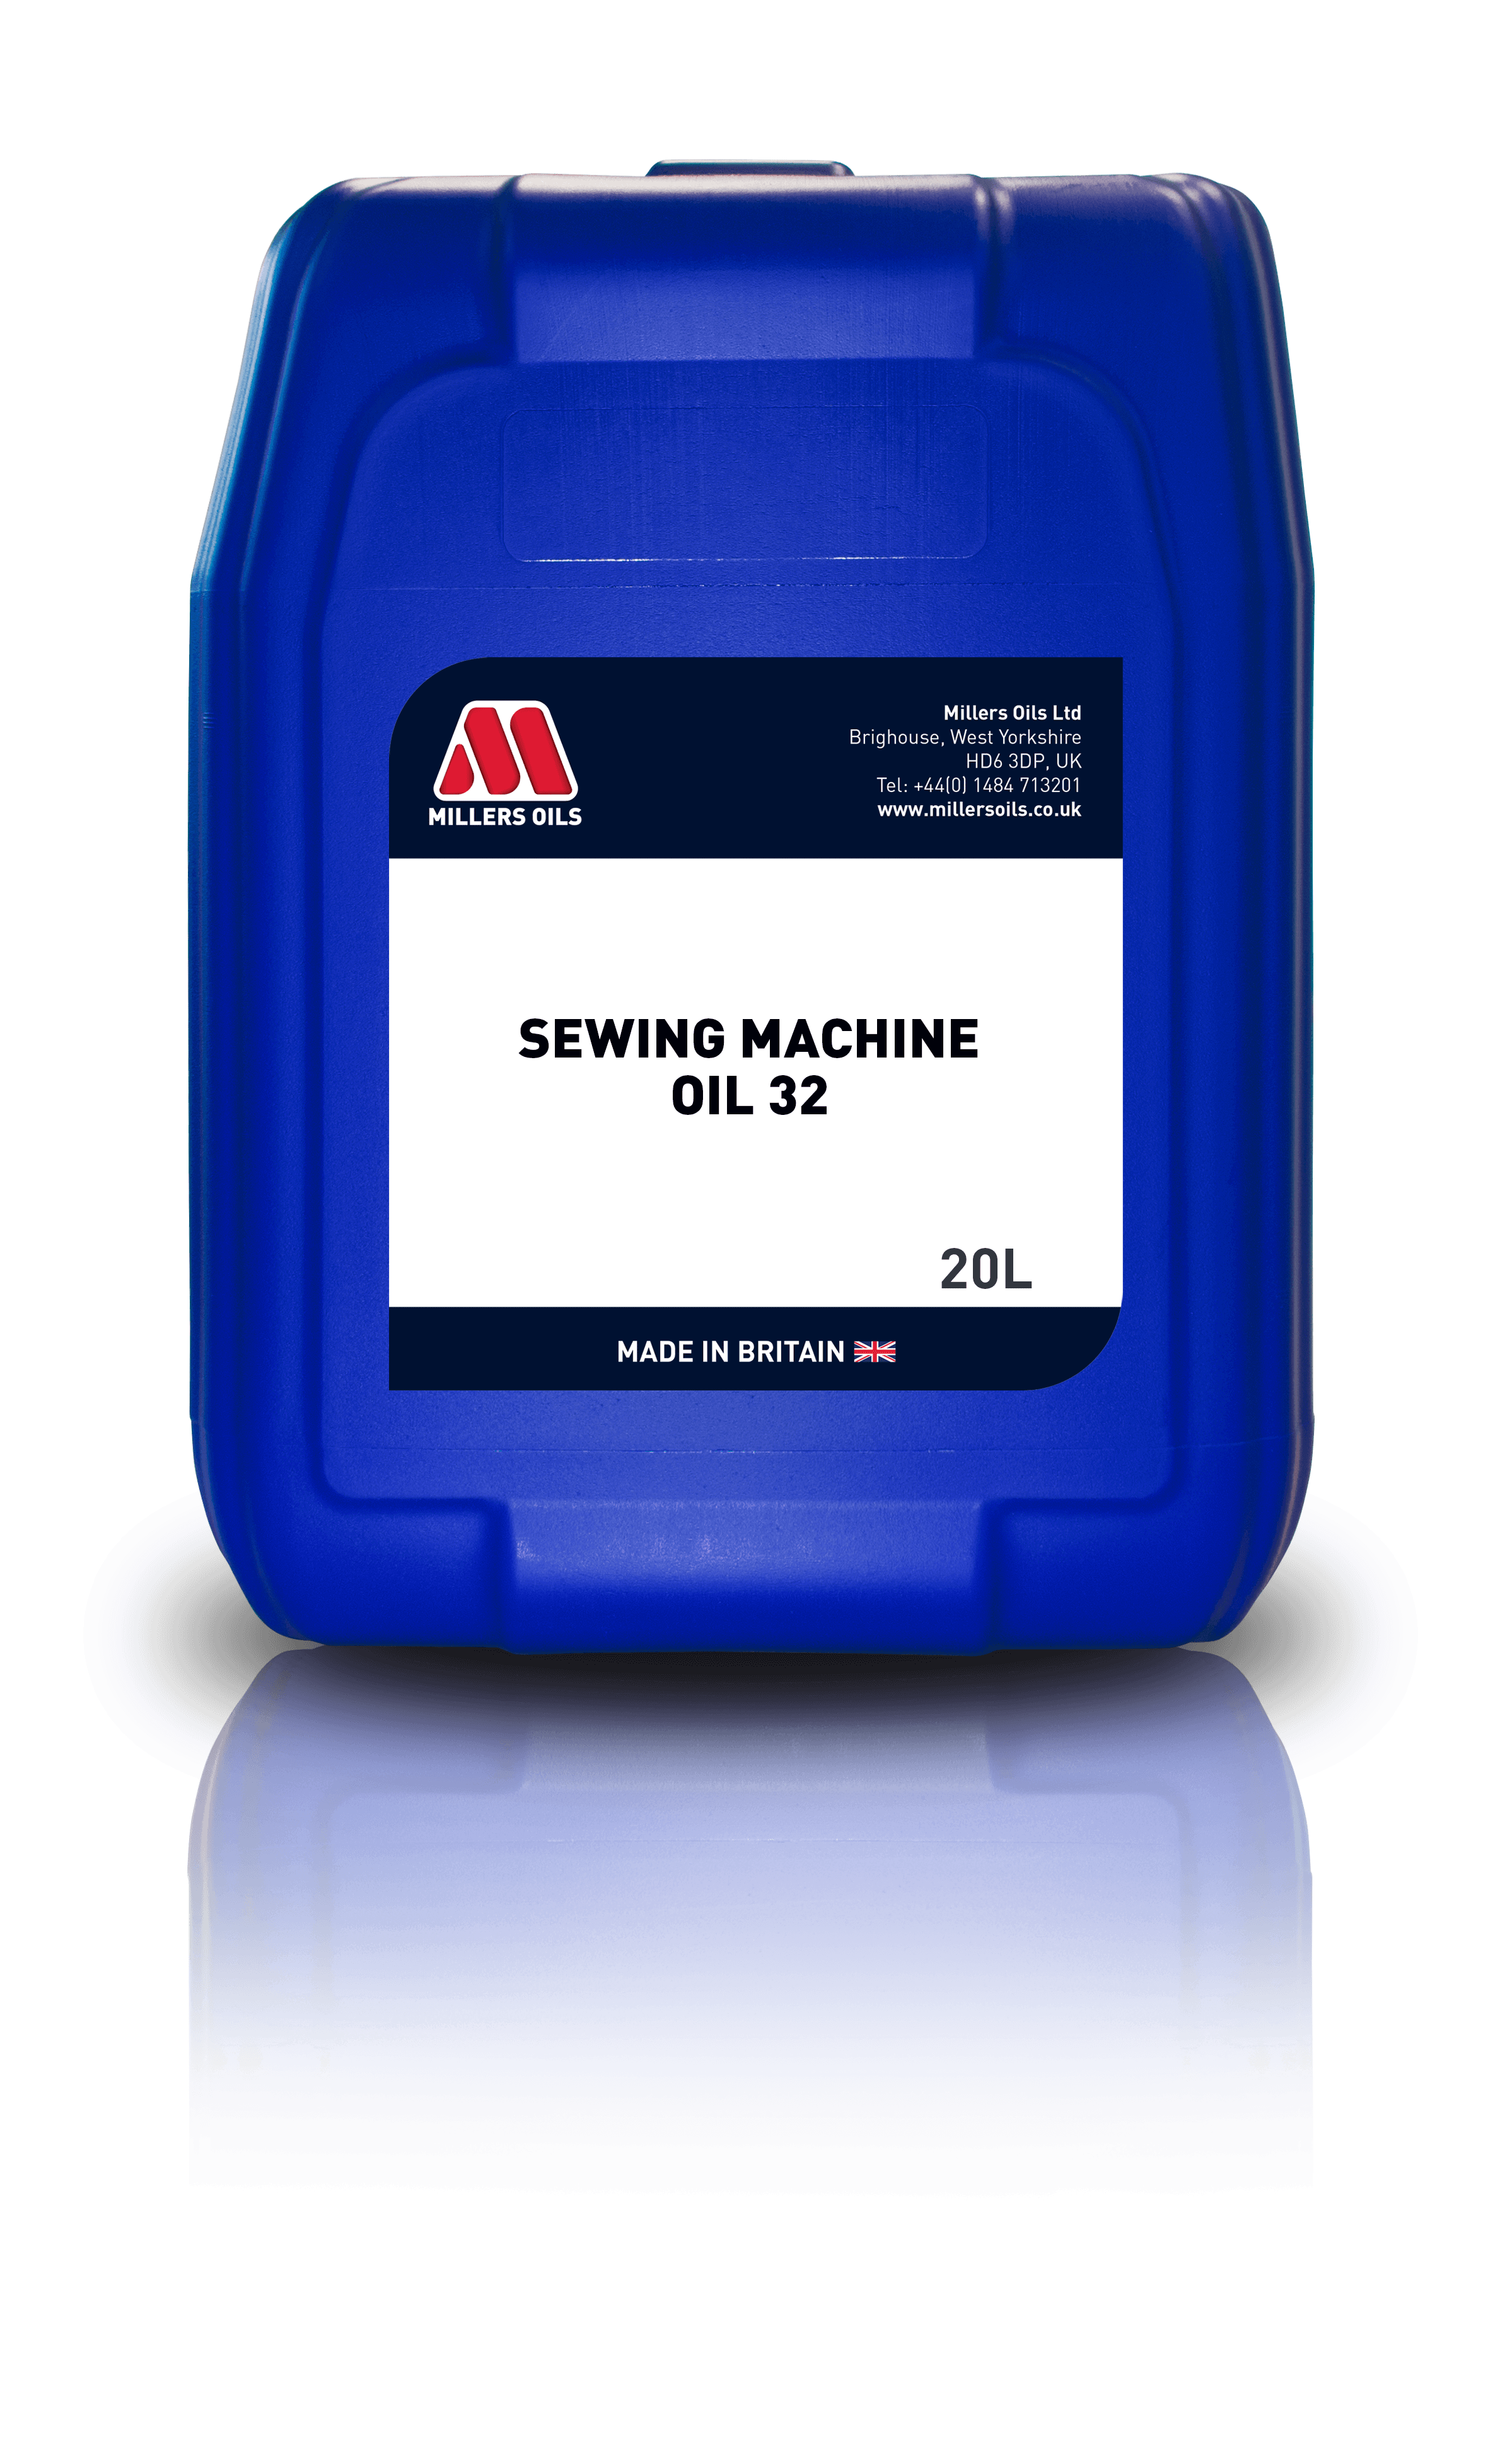 Sewing Machine Oil 32 - Millers Oils